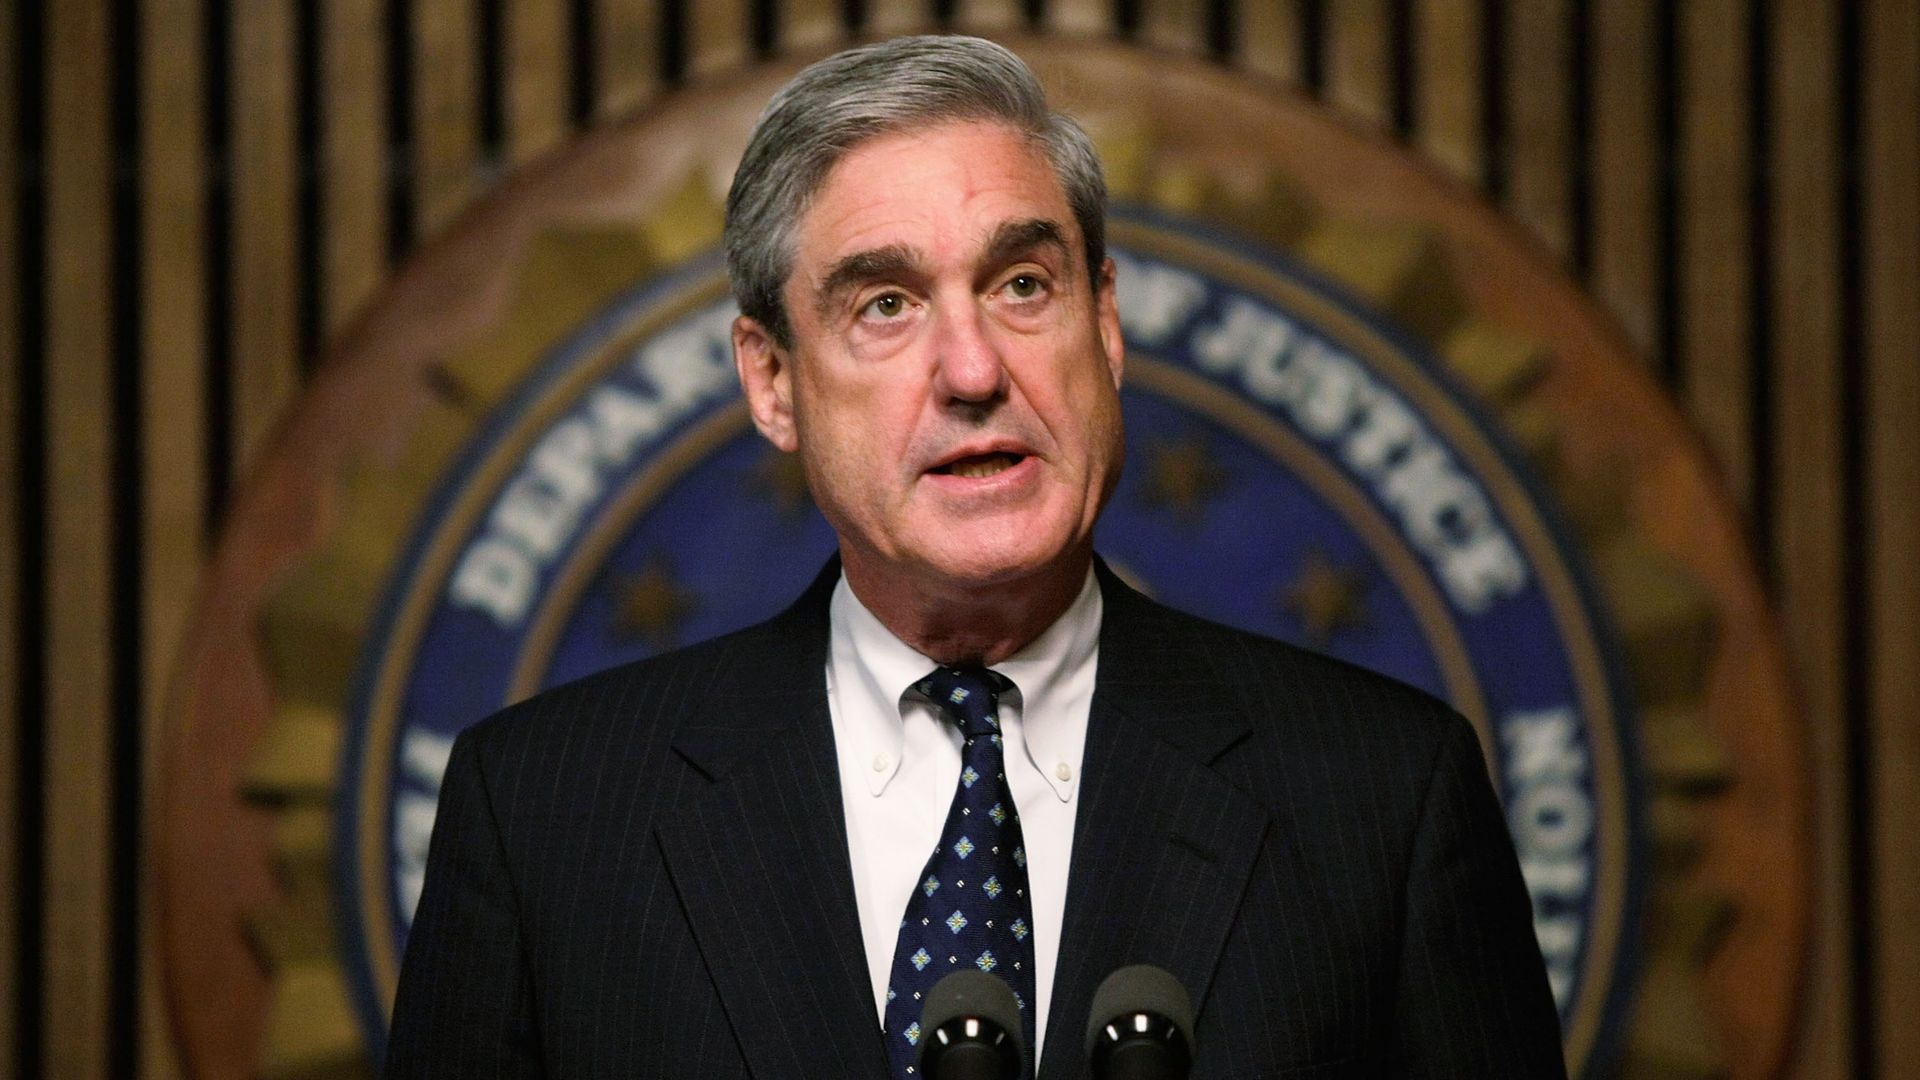 In this image, a suited Robert Mueller stands in front of a microphone podium with the logo of the Department of Justice behind him.